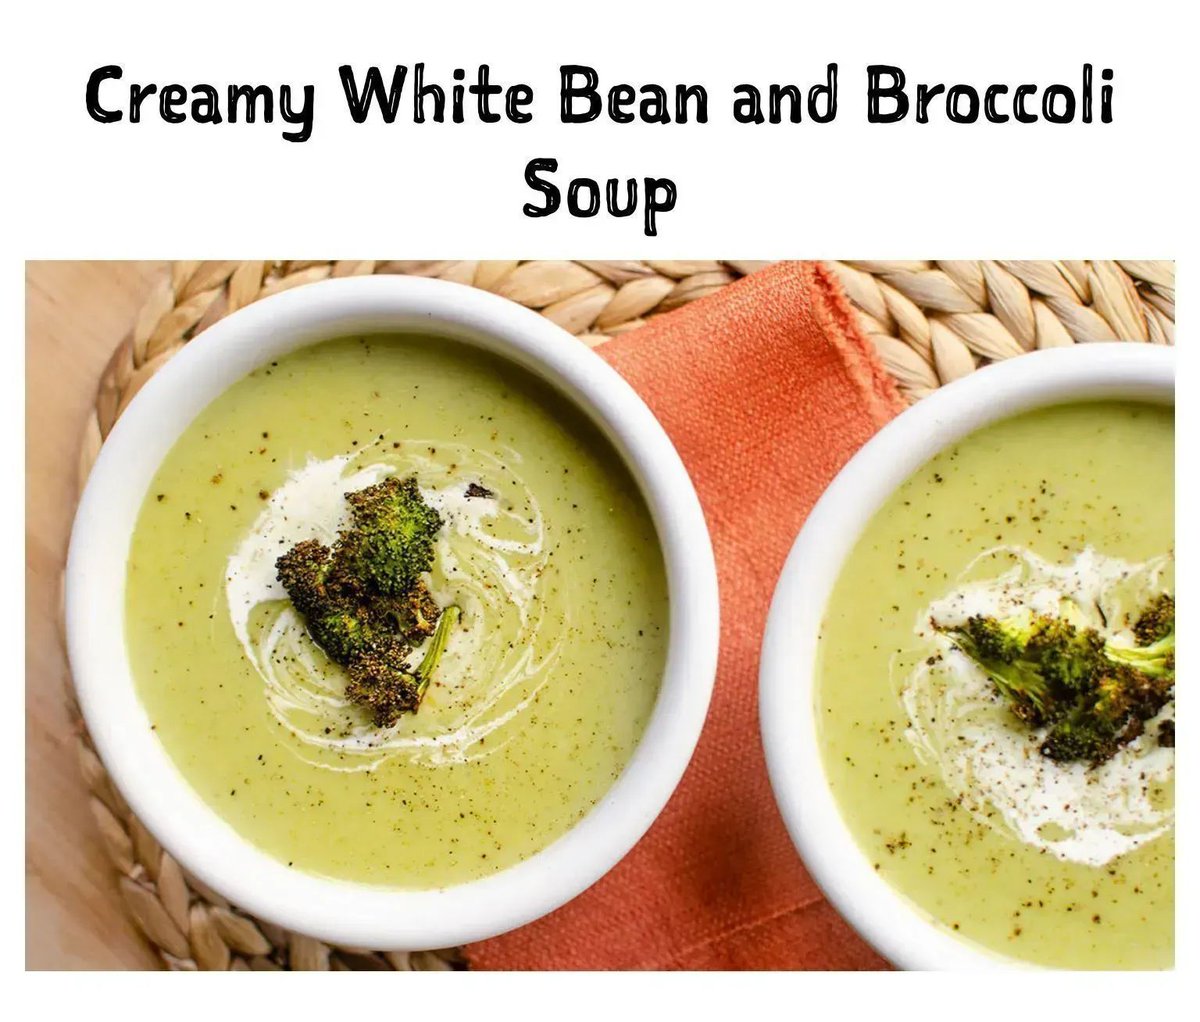 FABULOUS #recipe - enjoy this white bean and broccoli soup that’s made for @OntarioBeans - very creamy and full of flavour! ENJOY. 💕

RECIPE: buff.ly/2Y13LNV
#ad #BetterWithBeans